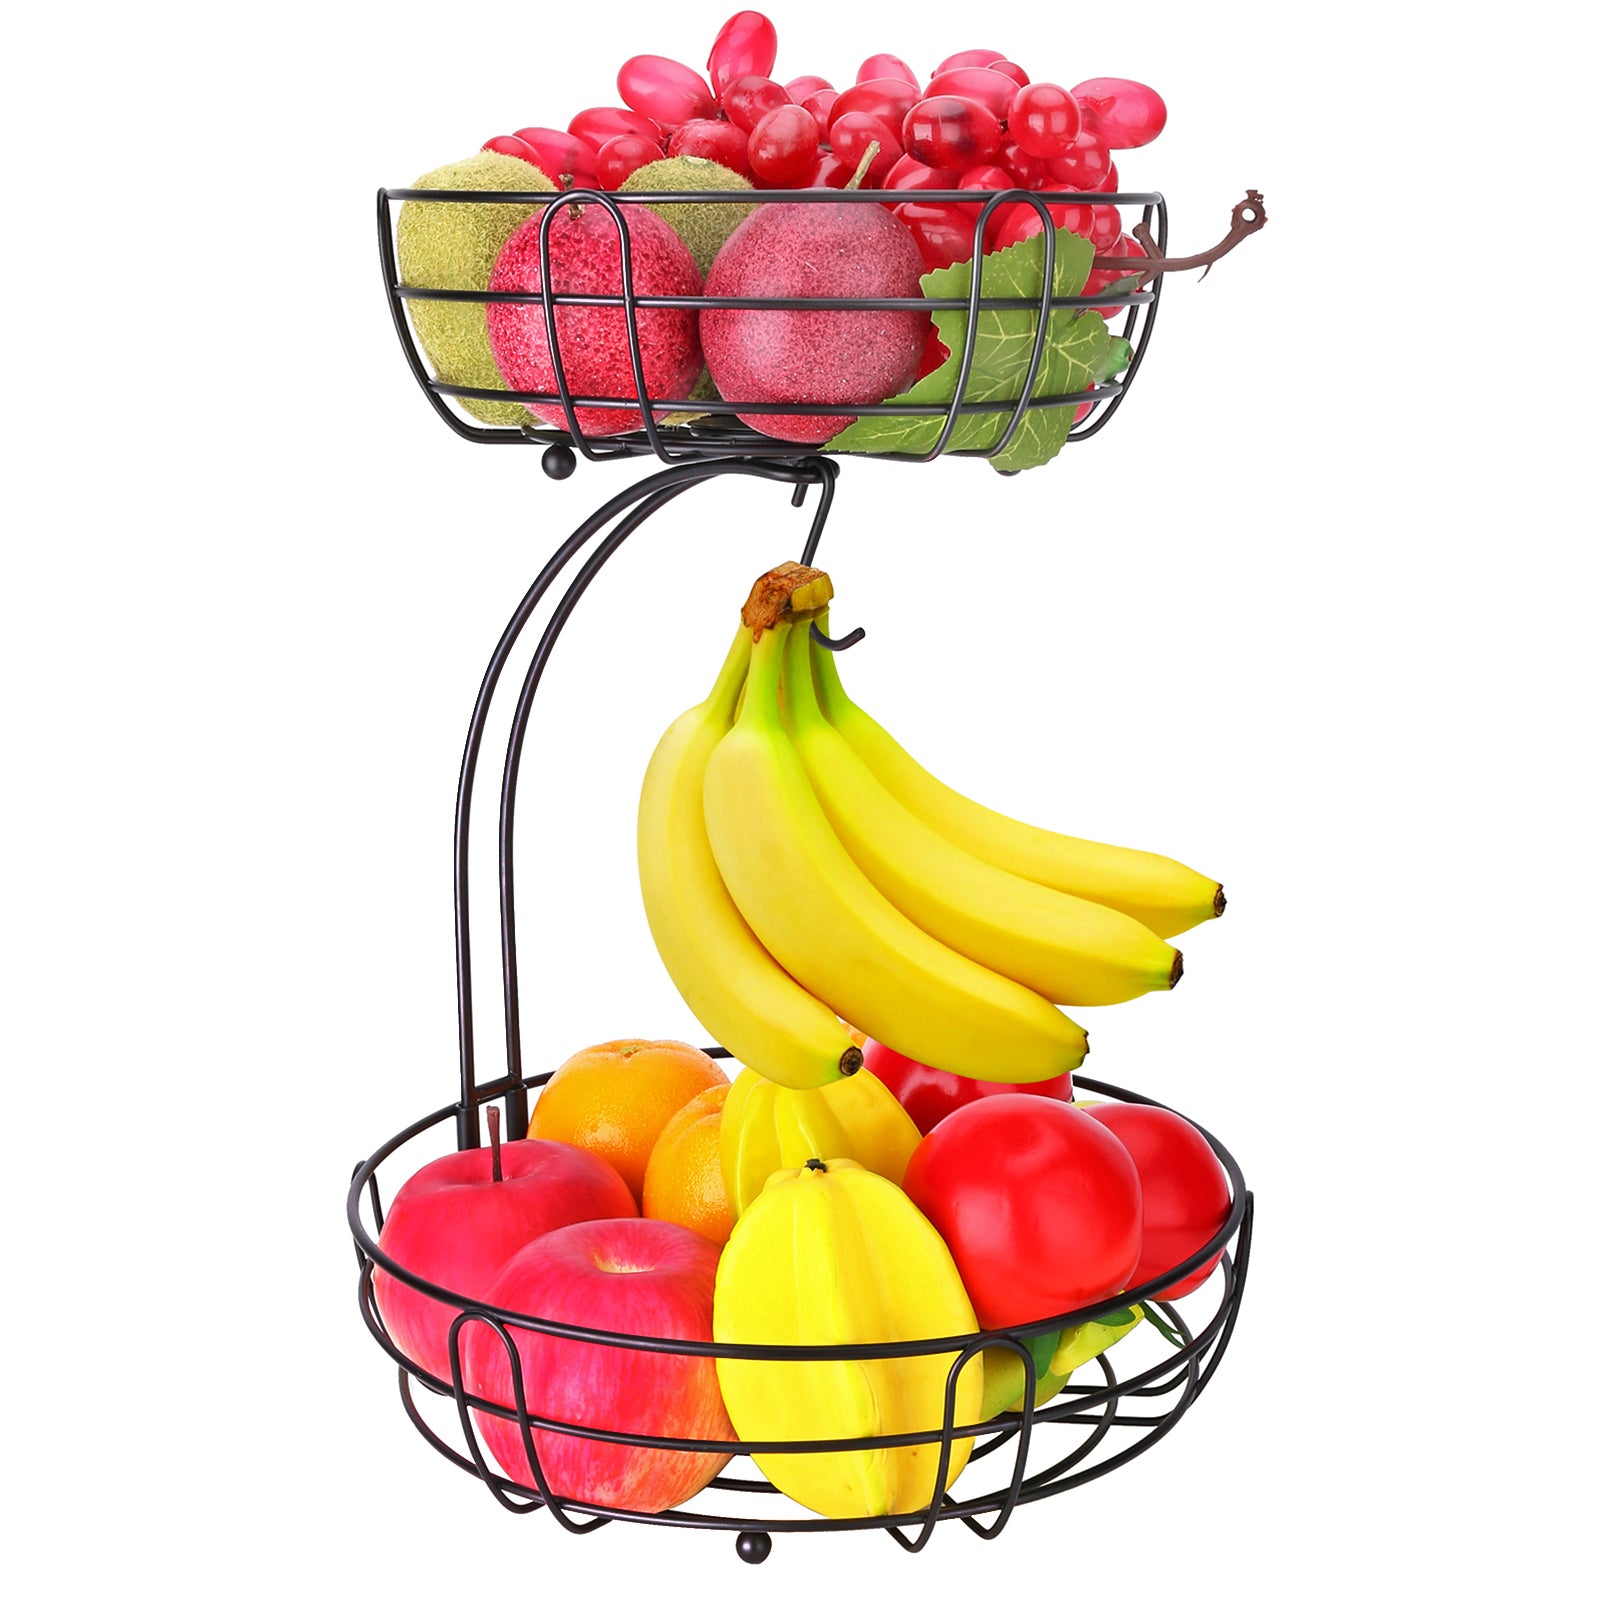 Fruit Basket for Kitchen Countertop, Black 2 Tier Fruits Holder Stand with  Banana Hanger, Wire Produce Vegetable Storage Bowl